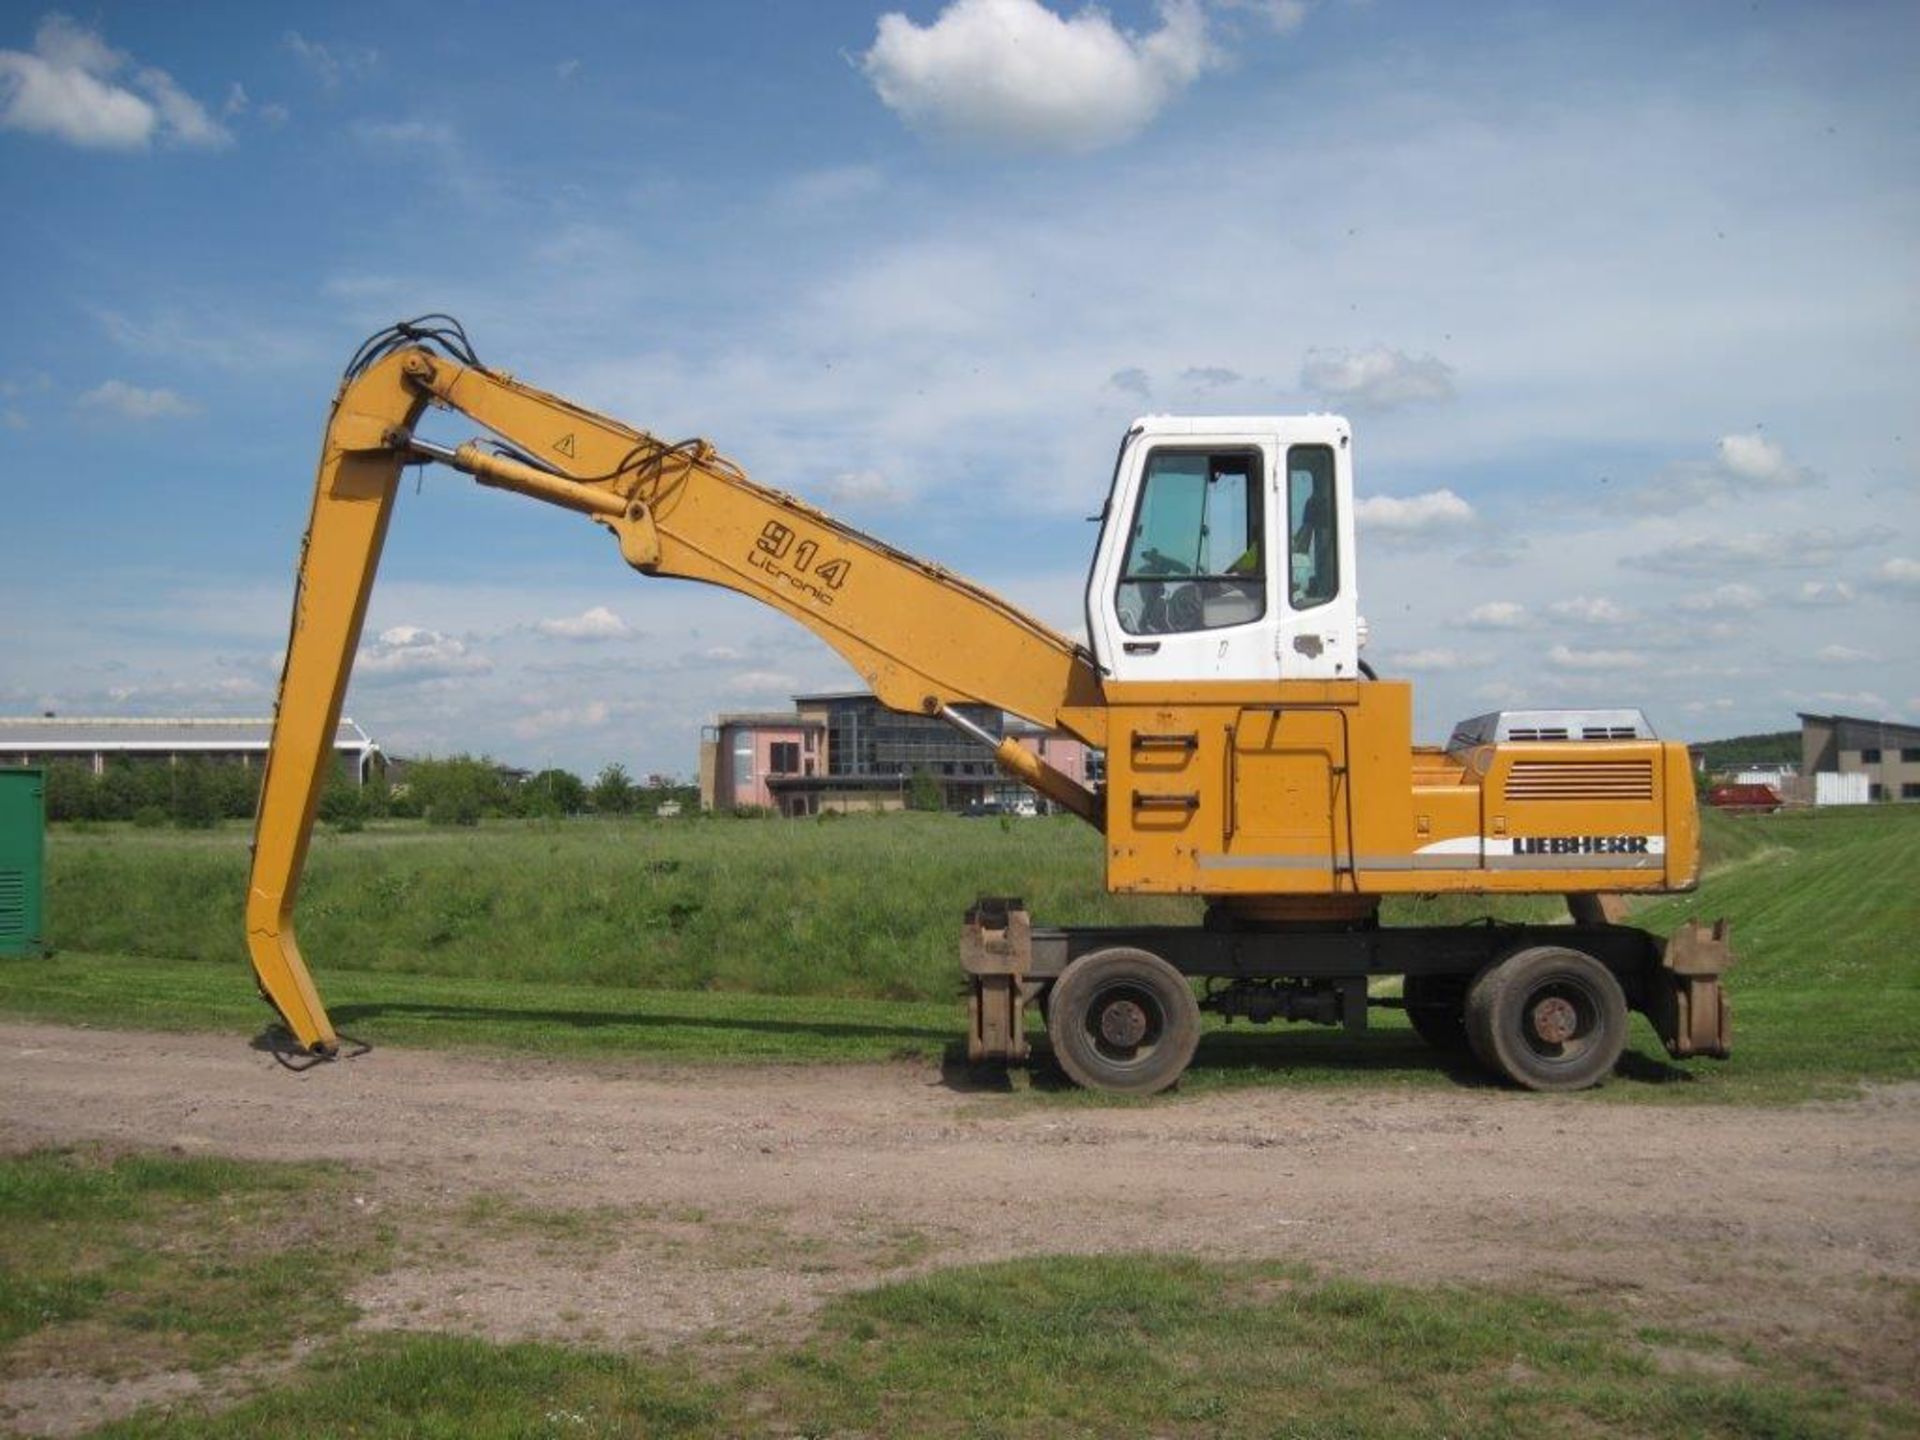 Liebherr 914 Rehandler on Wheels 2003.
Very good condition, high cab, solid wheels and long reach - Image 3 of 4